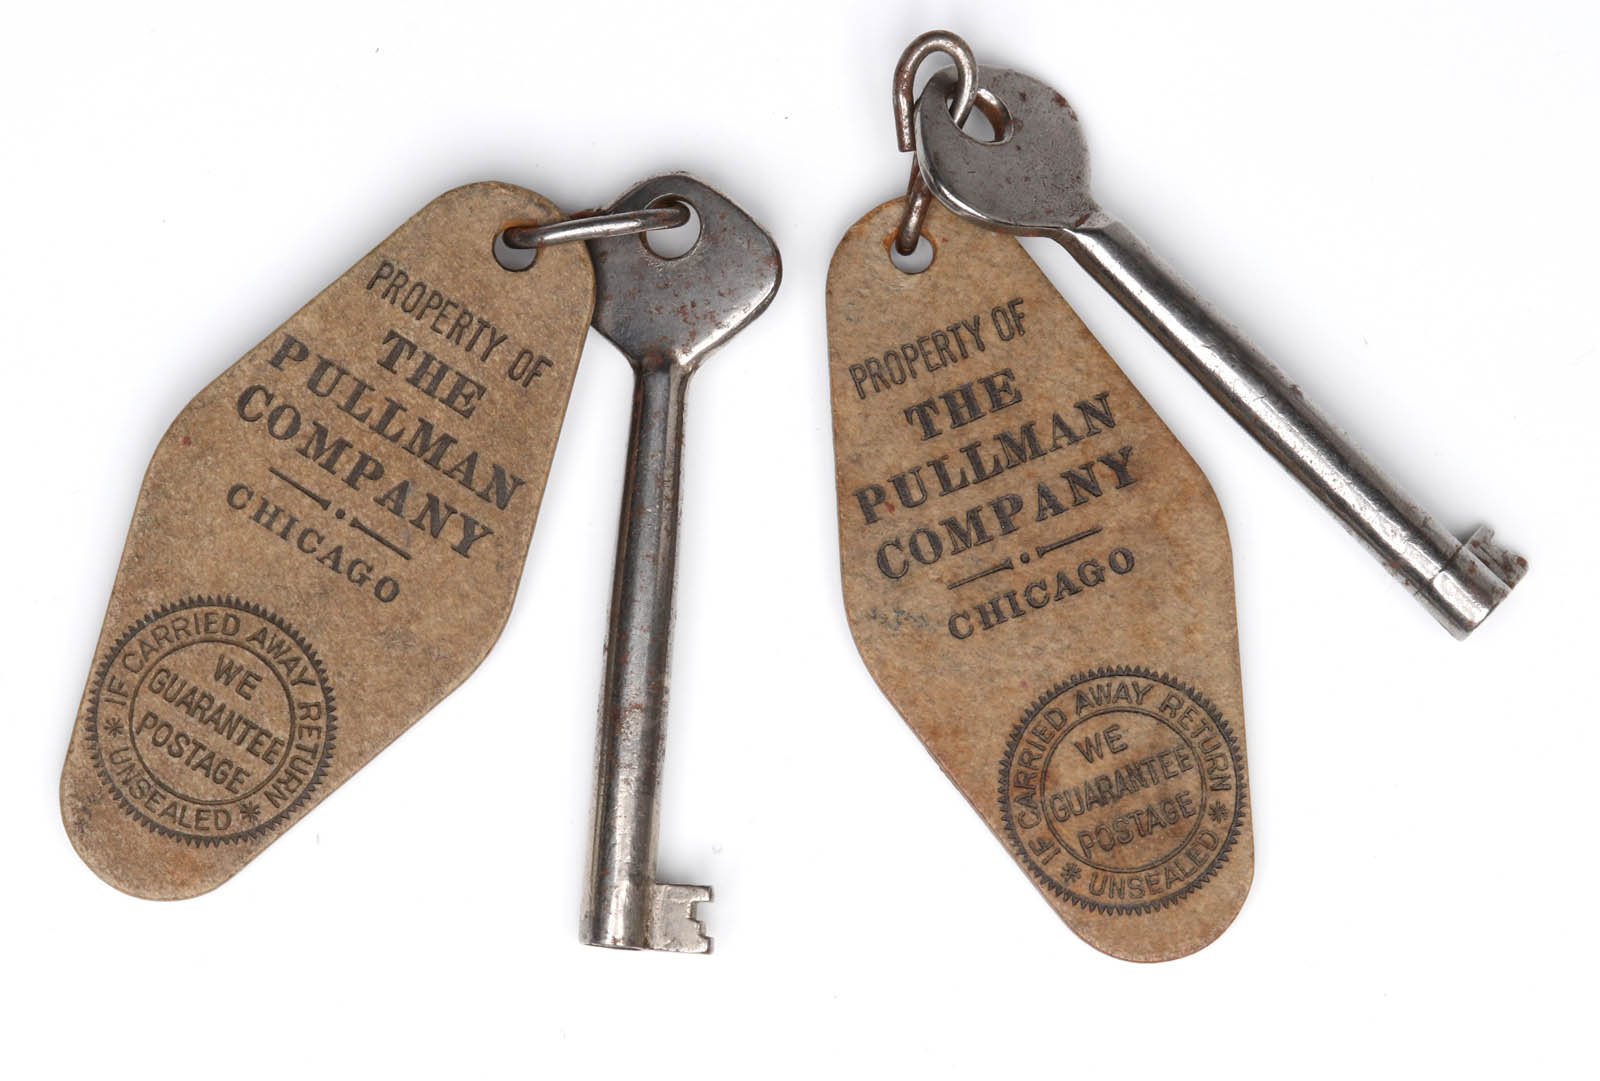 TWO PULLMAN RAILROAD COMPANY KEYS AND FOBS